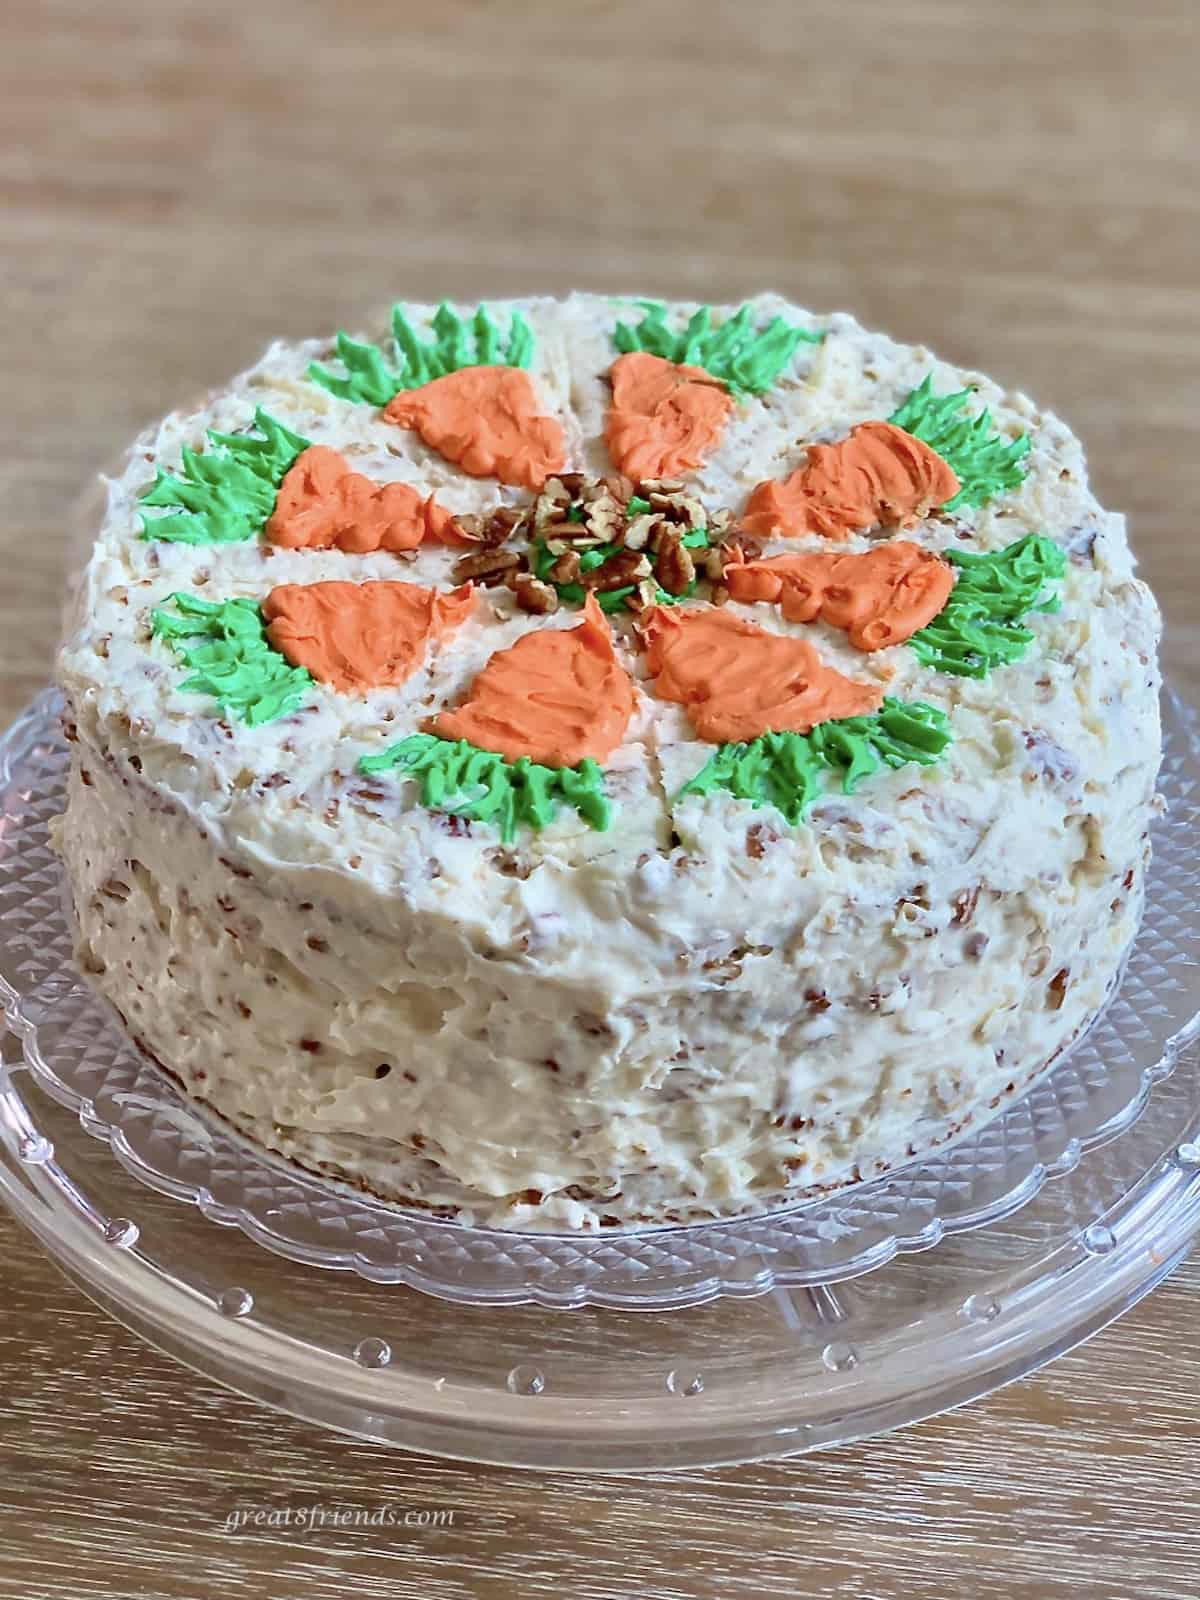 Homemade carrot cake with carrots on the top made of orange and green icing.